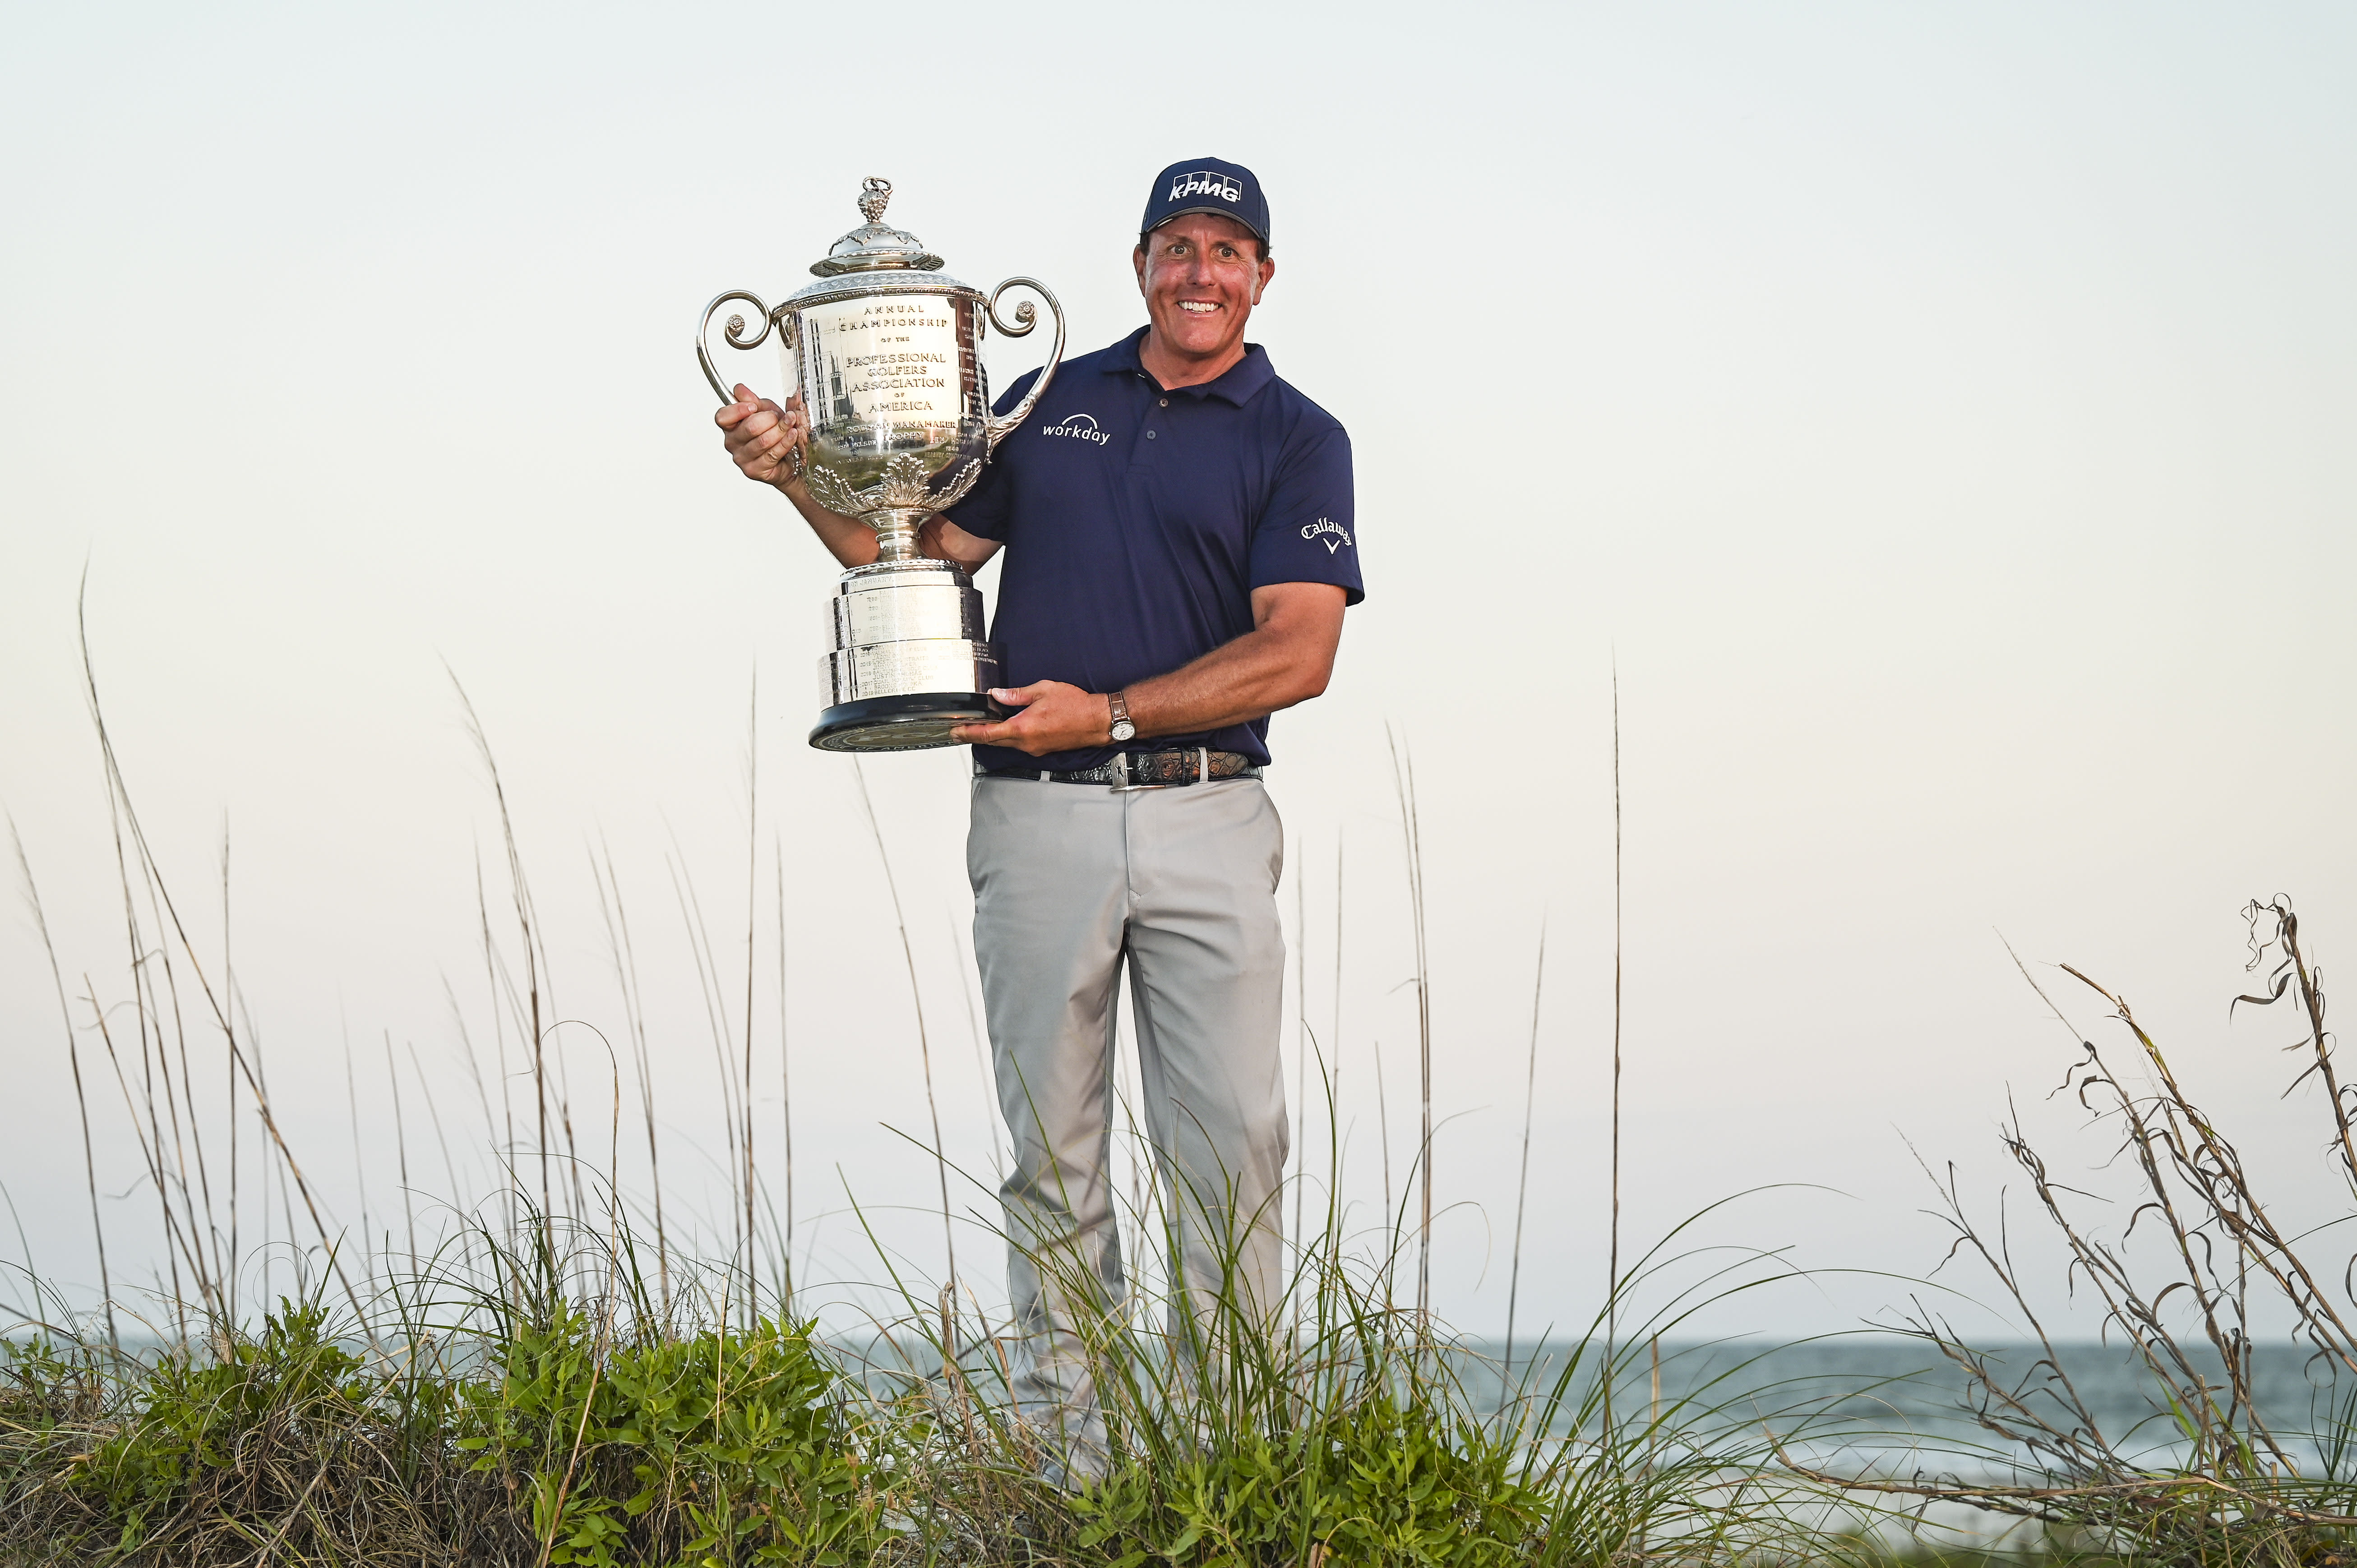 Phil Mickelsons PGA Championship win attracted 6.5 million viewers